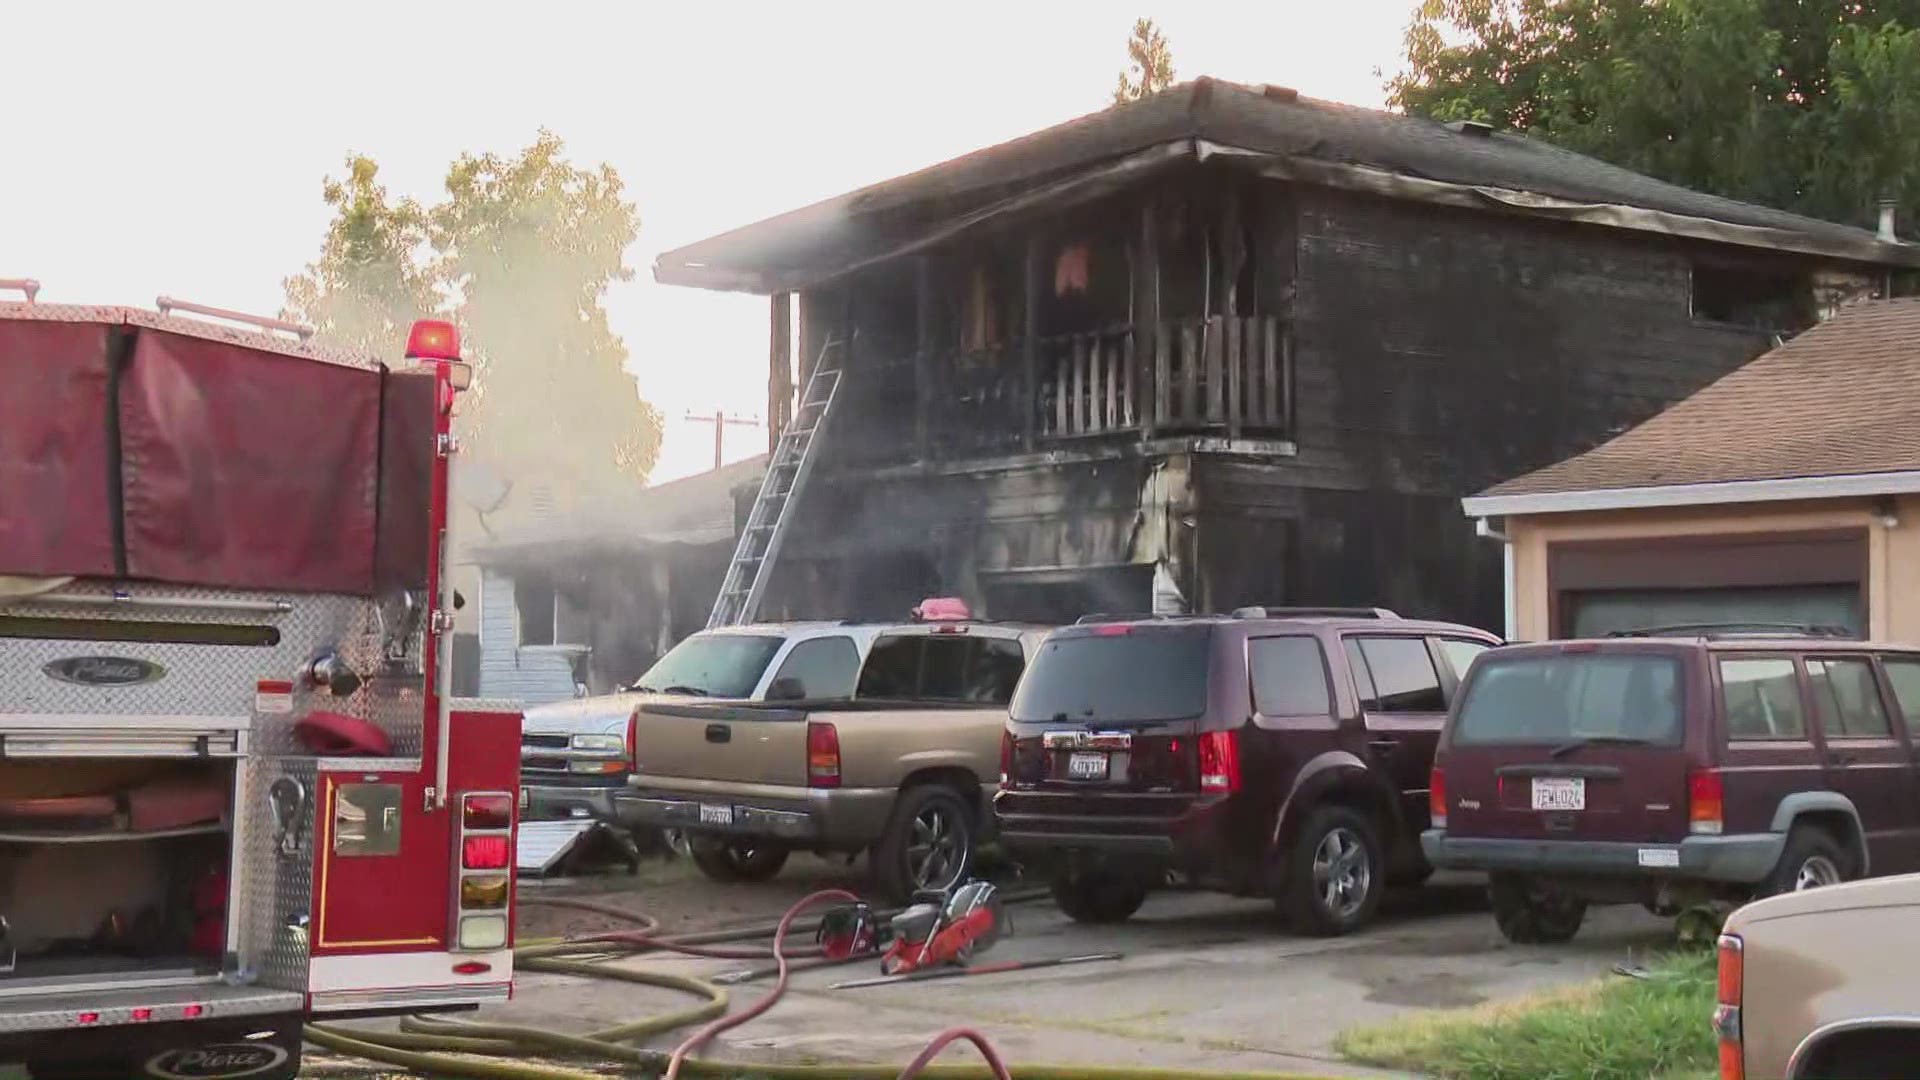 No injuries reported after a house catches fire near 47th Street in south Sacramento.